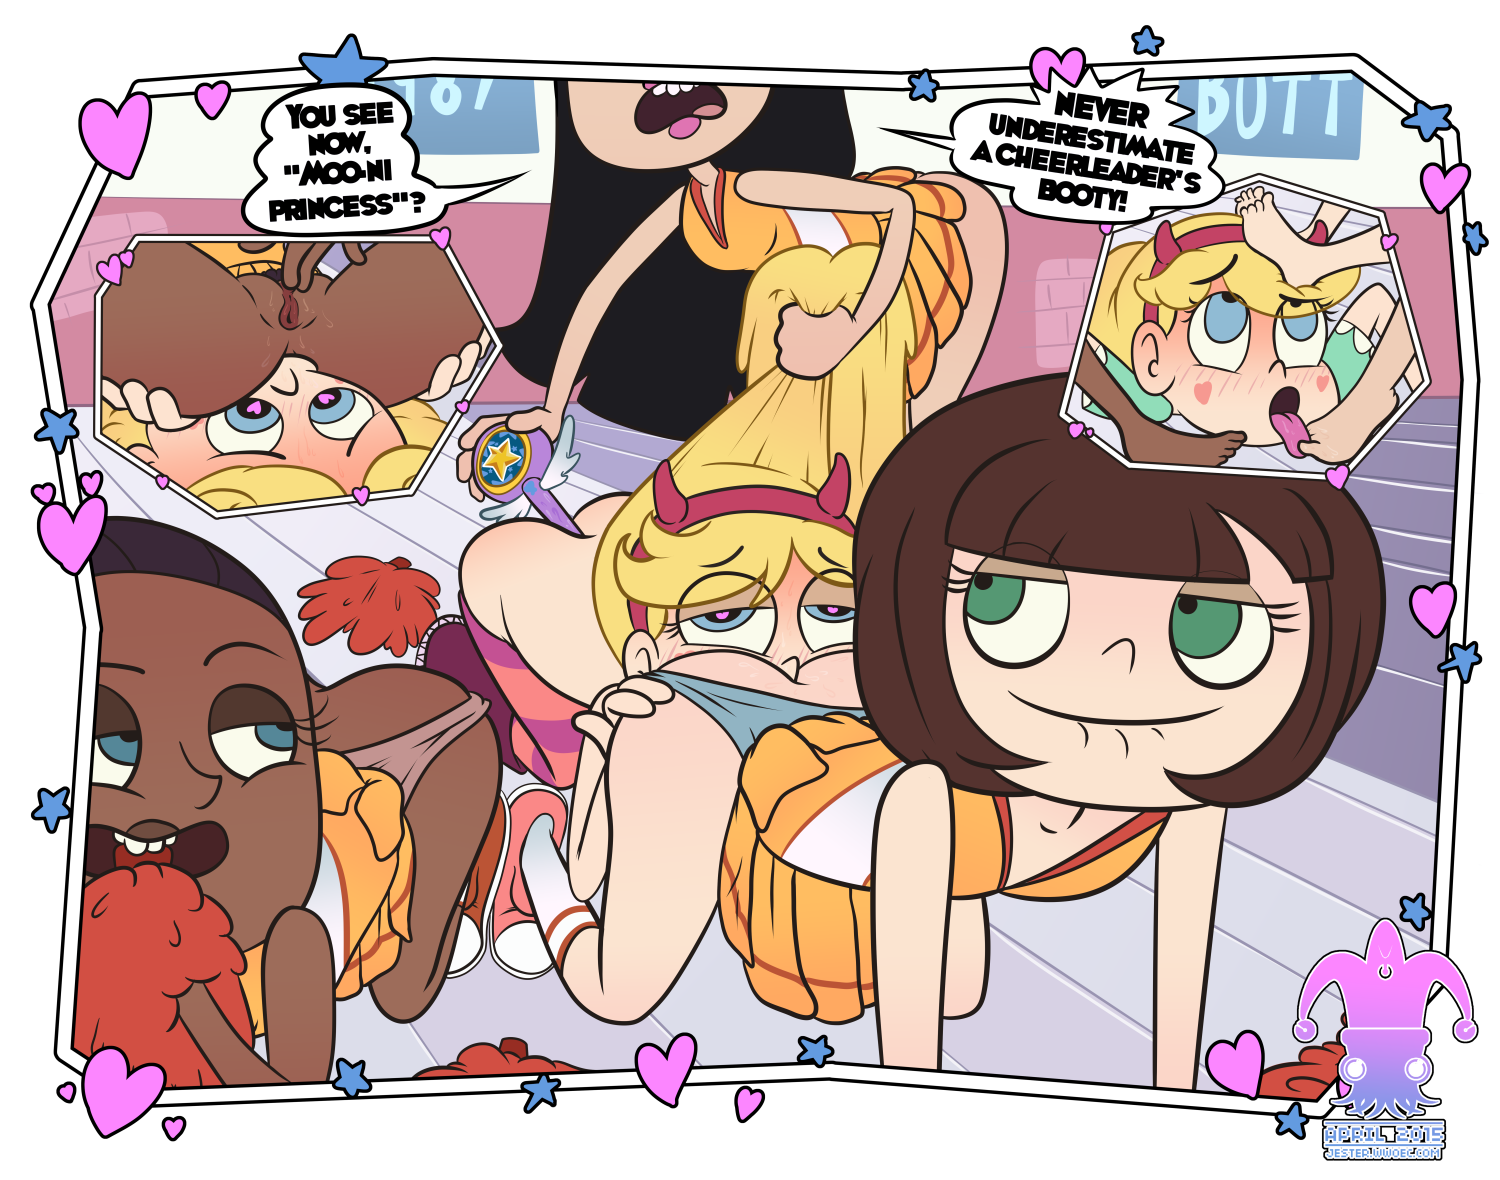 Star Vs The Forces Of Evil Xxx